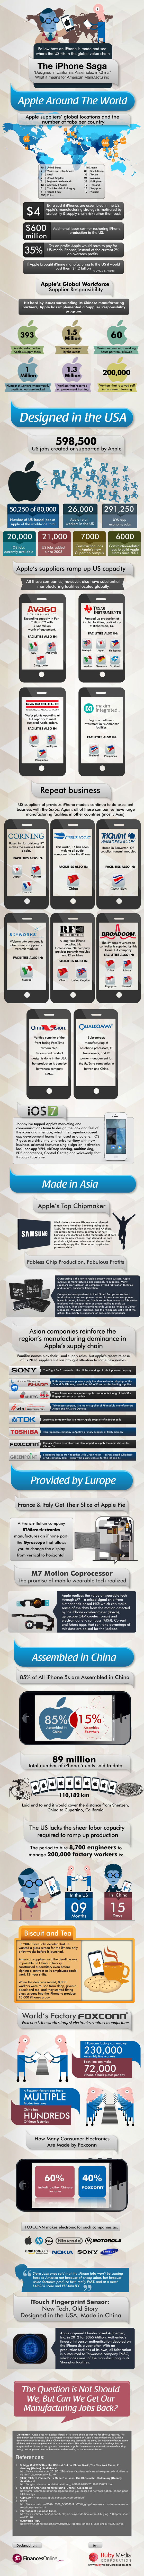 Where iPhones Are Made: Interesting Facts on How Much of Apple's Smartphone is US-manufactured